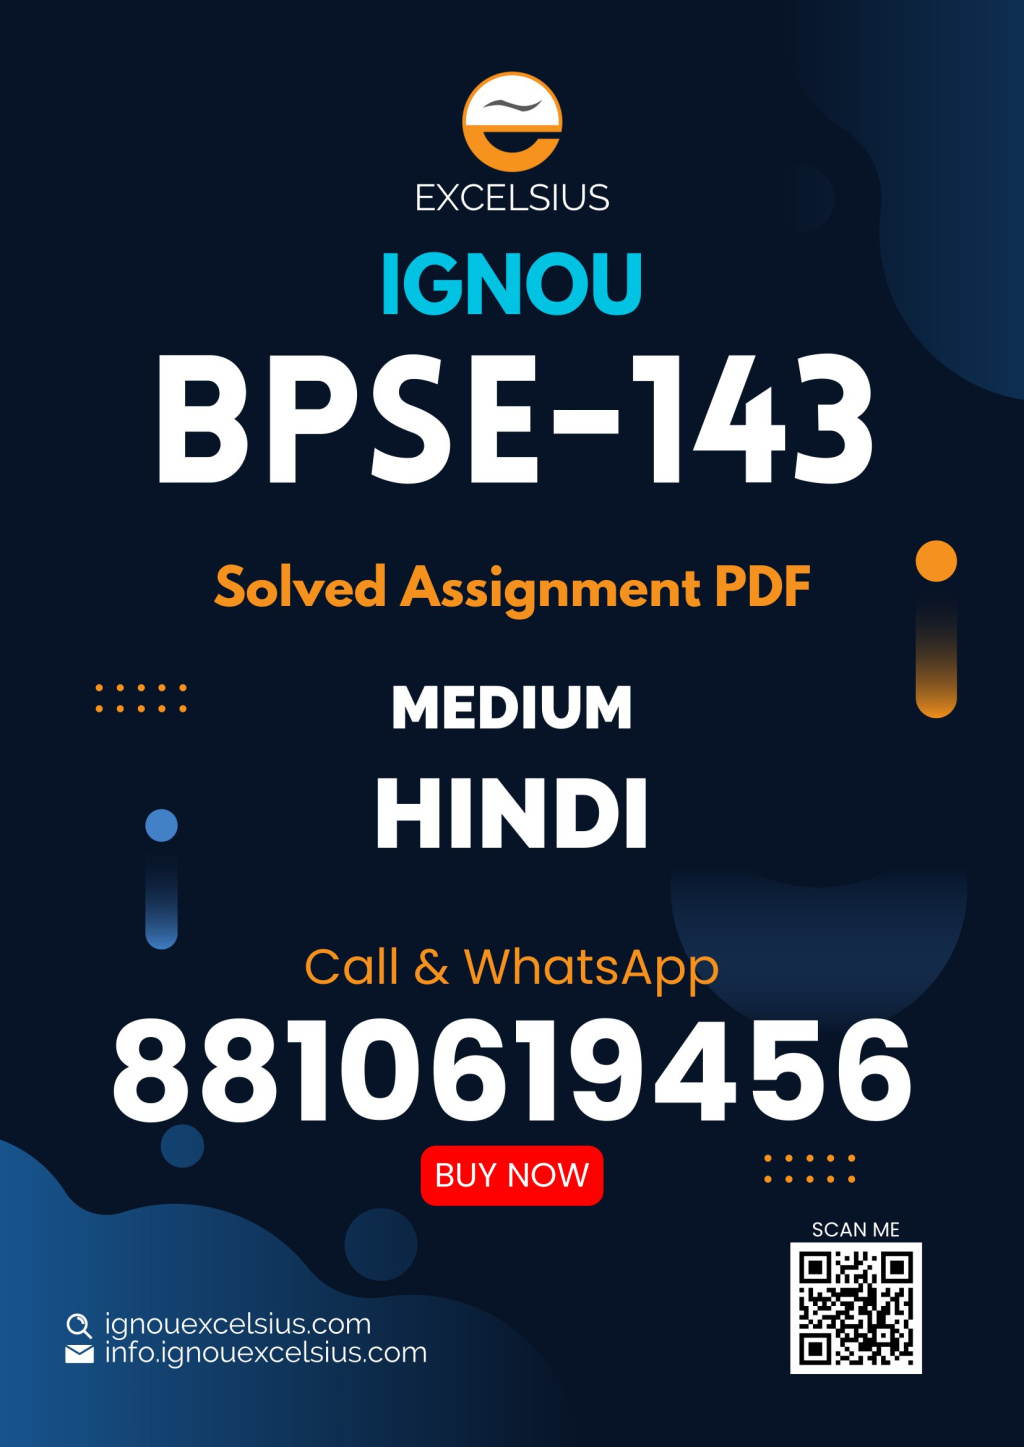 IGNOU BPSE-143 - State Politics in India, Latest Solved Assignment-July 2022 – January 2023